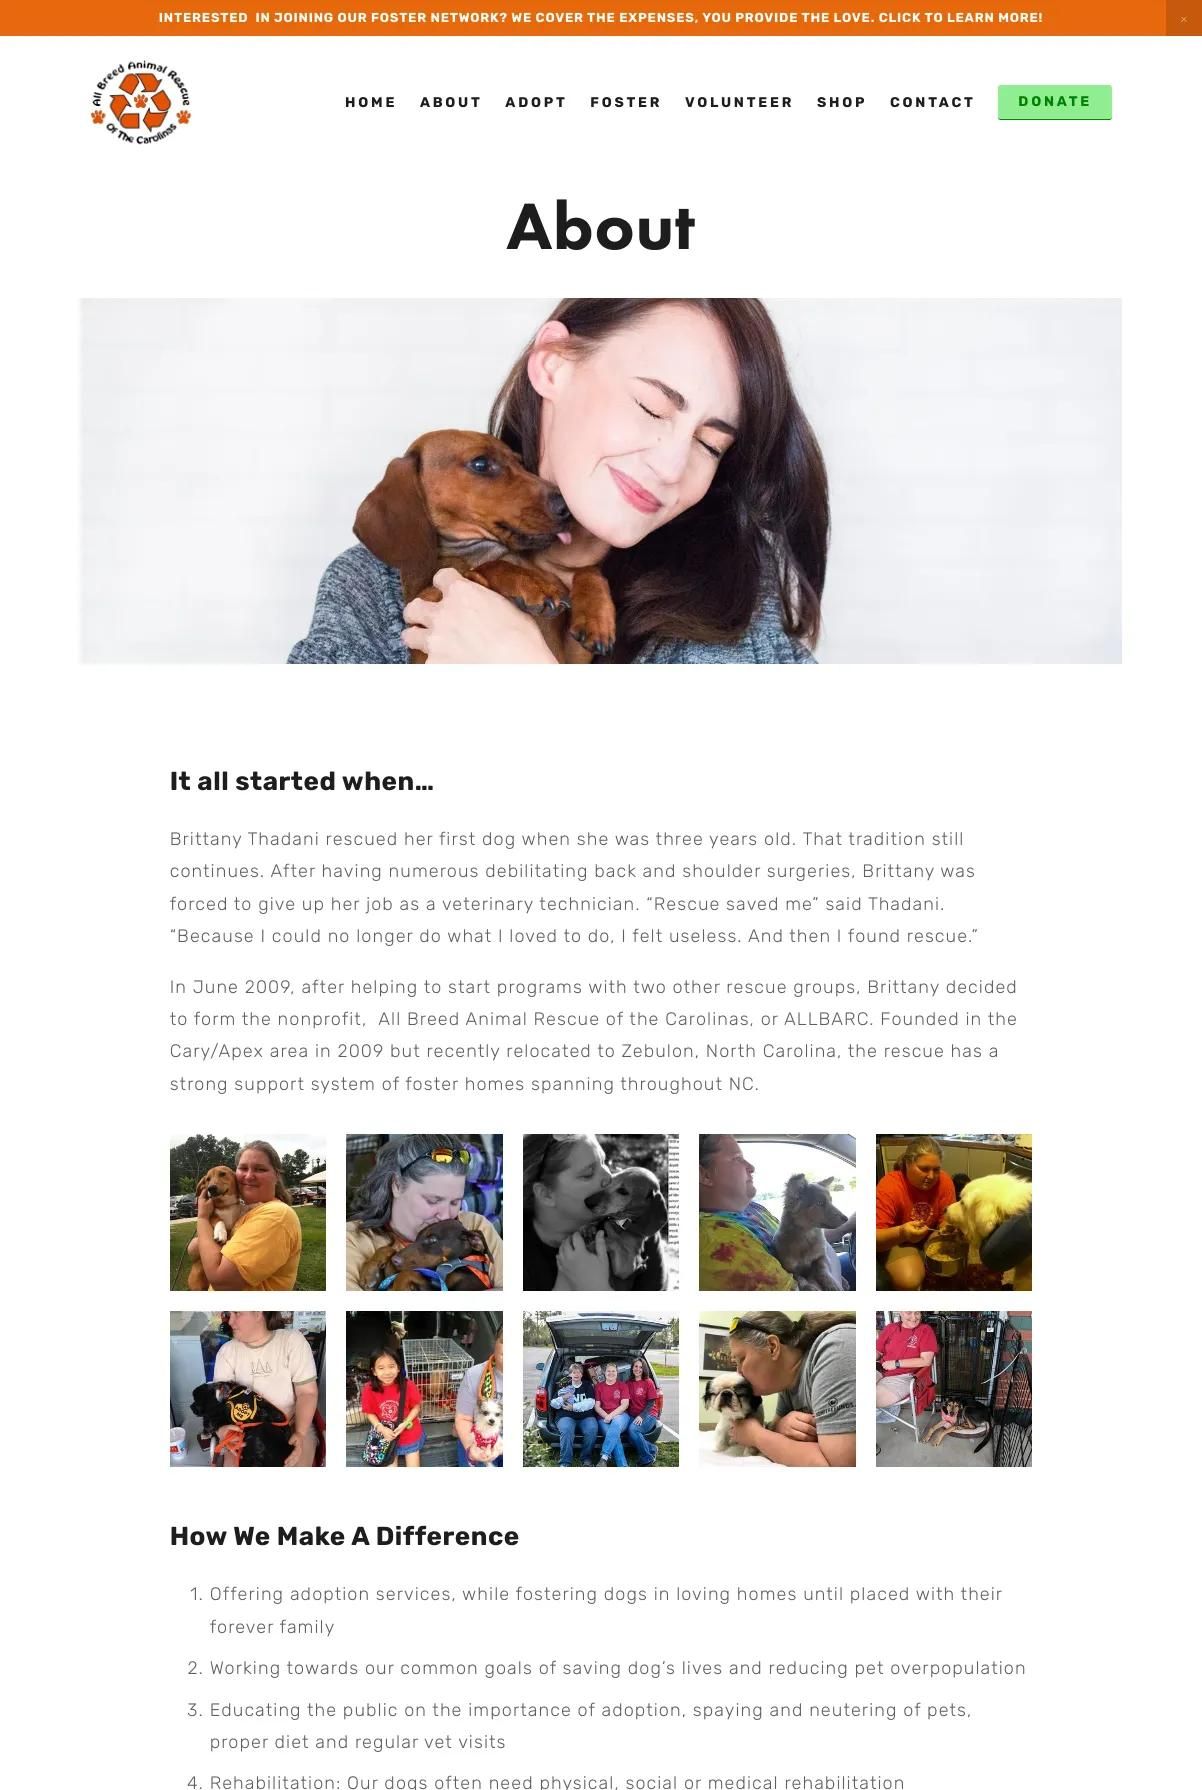 Screenshot 2 of All Breed Animal Rescue of the Carolinas (Example Squarespace Nonprofit Website)